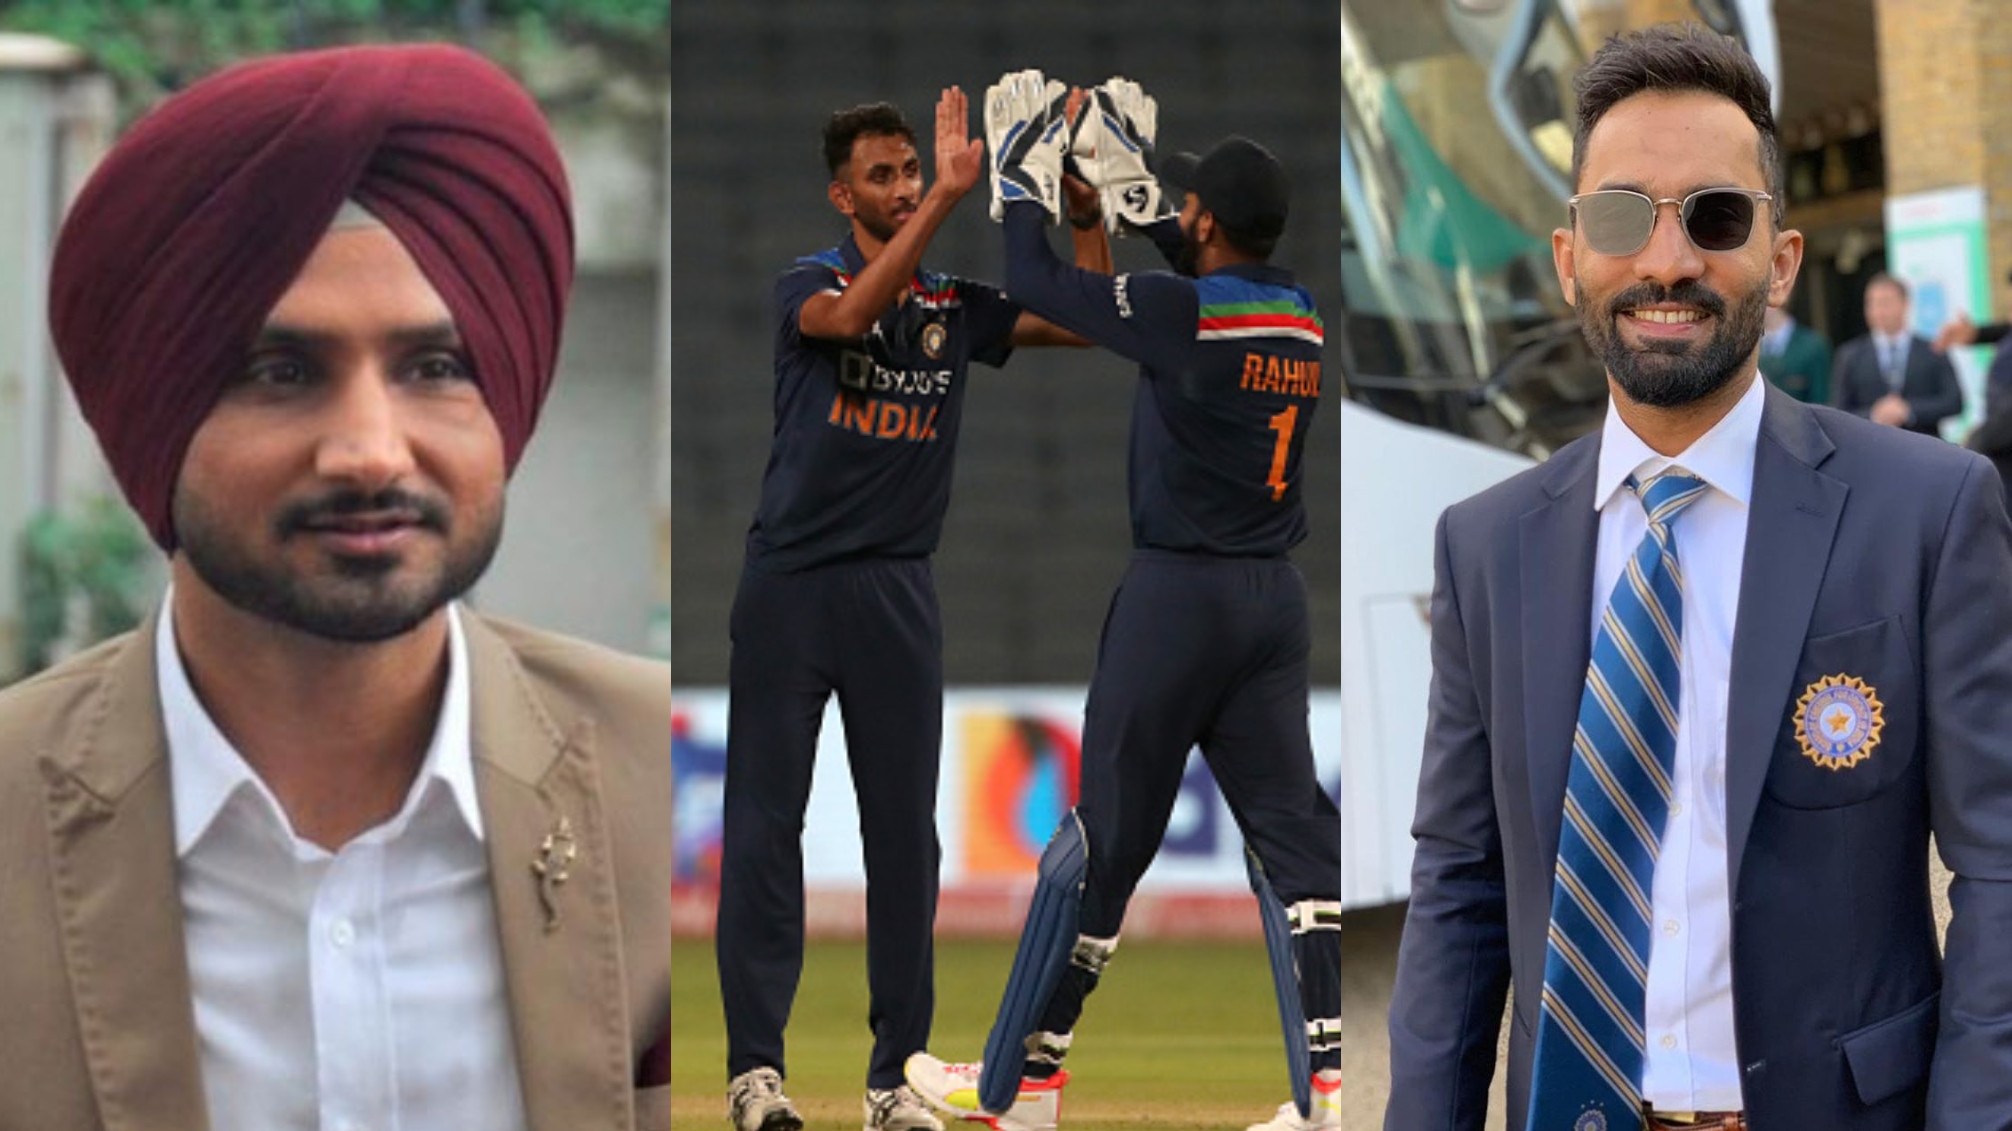 IND v ENG 2021: Cricket fraternity reacts as Prasidh Krishna’s 4 wickets earns India a 66-run win in 1st ODI